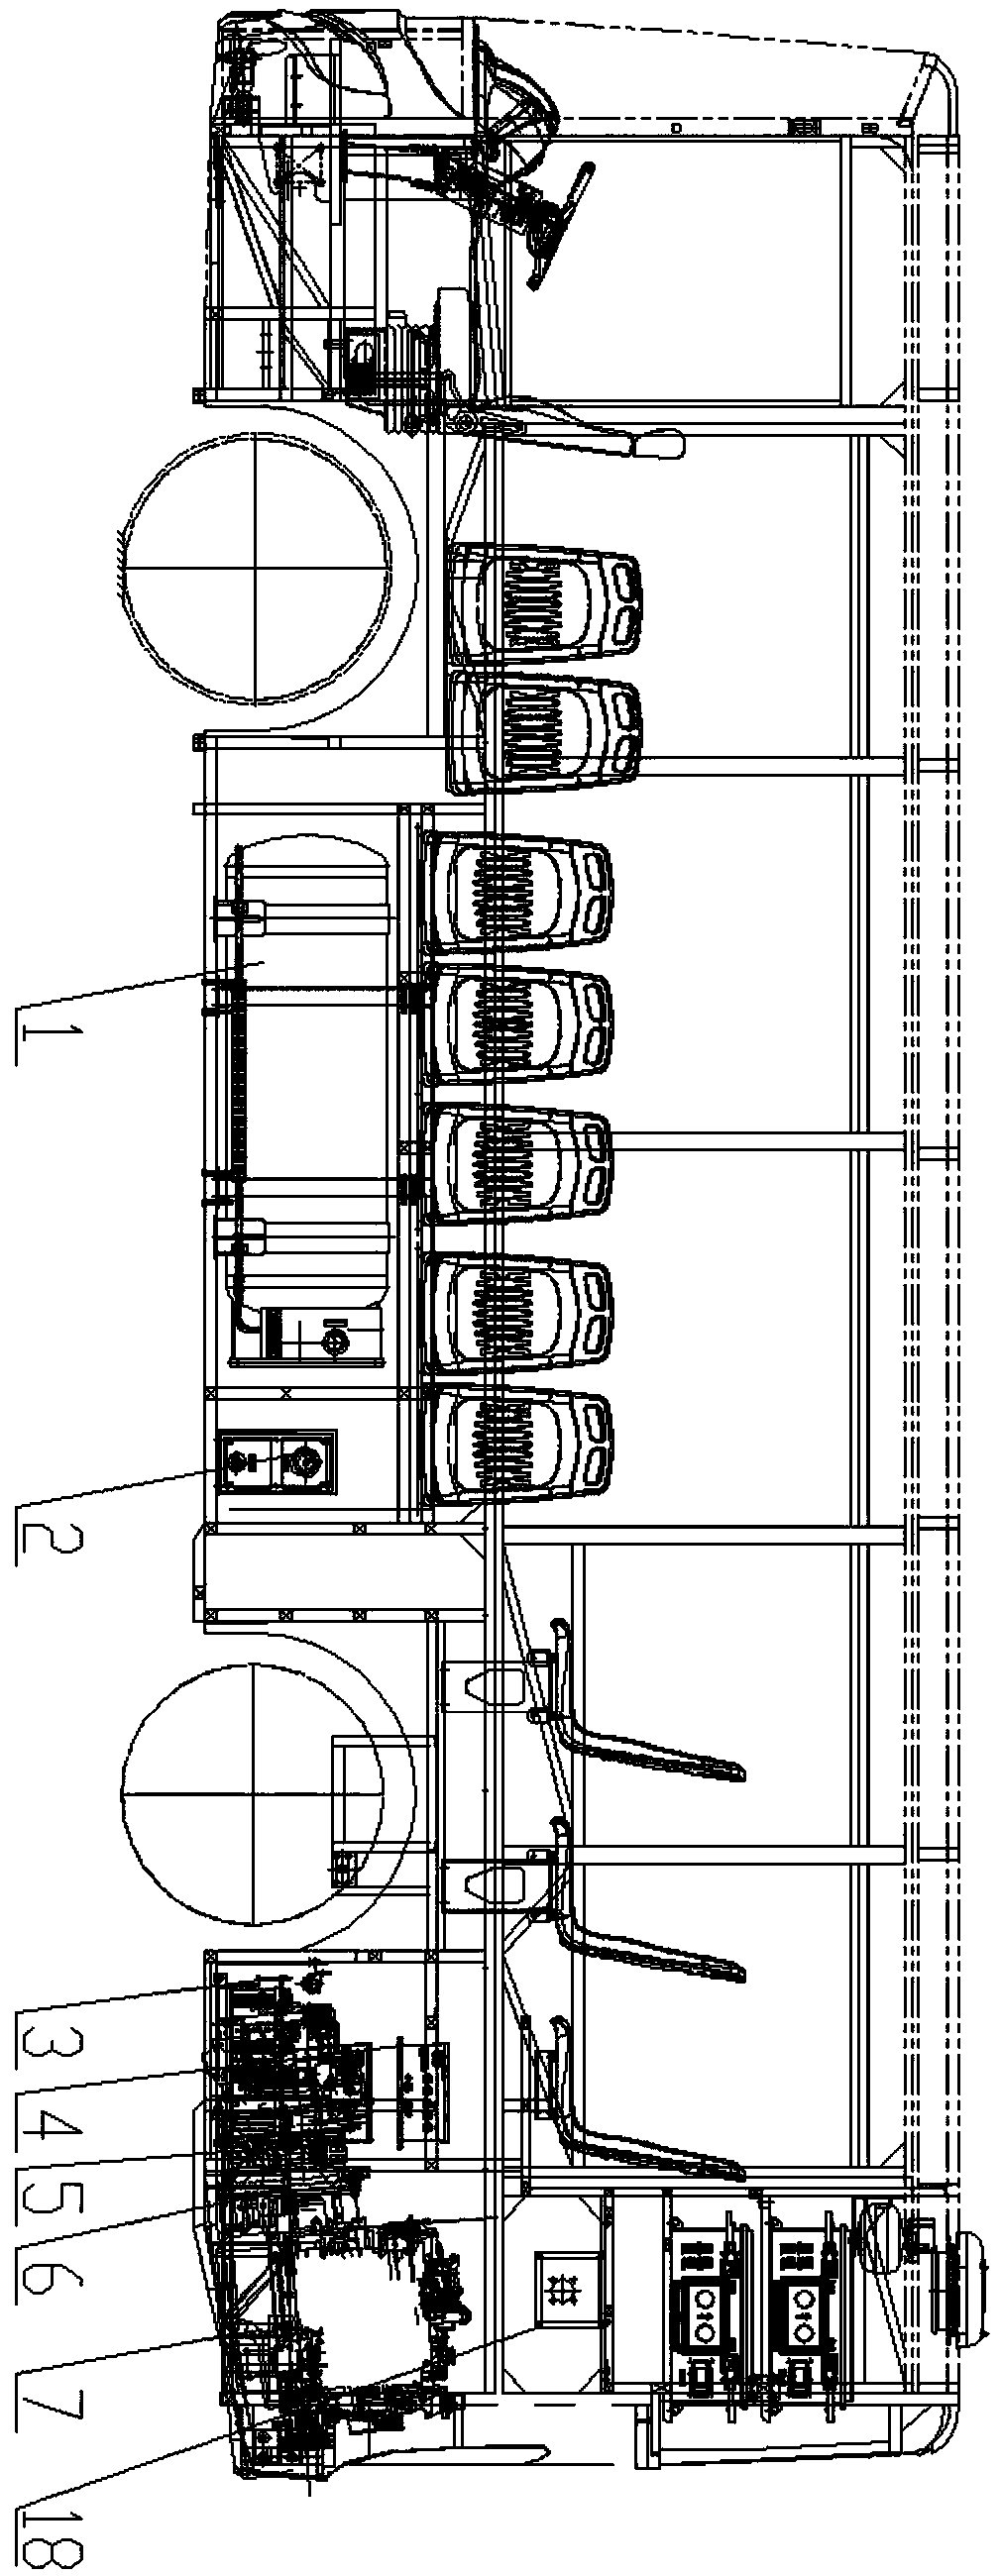 Pneumatic-electric system of a pneumatic-electric hybrid electric bus